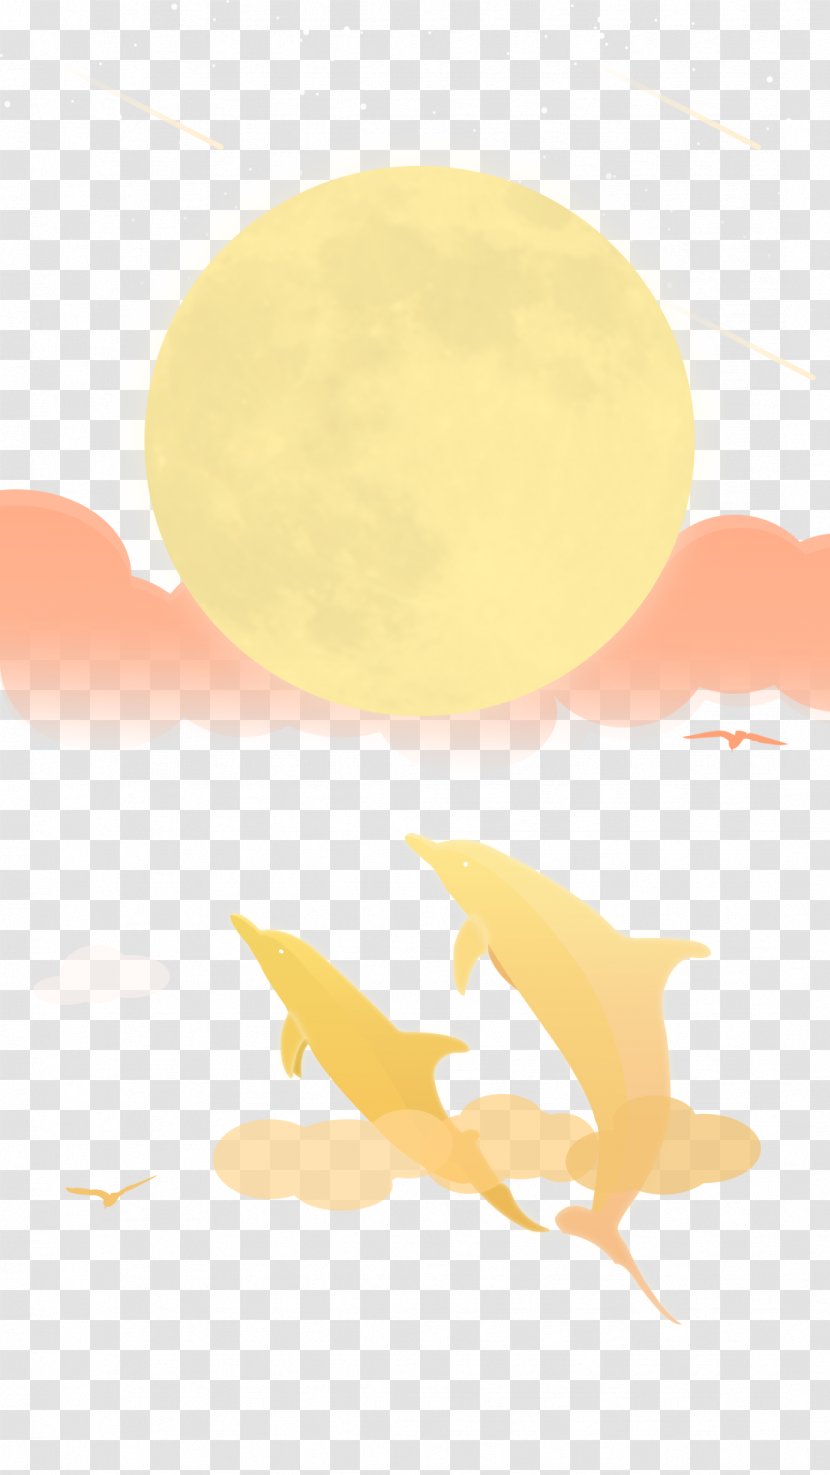 Mobile Phone Page Daccueil Download - Telephone - Sky Dolphin Start Transparent PNG